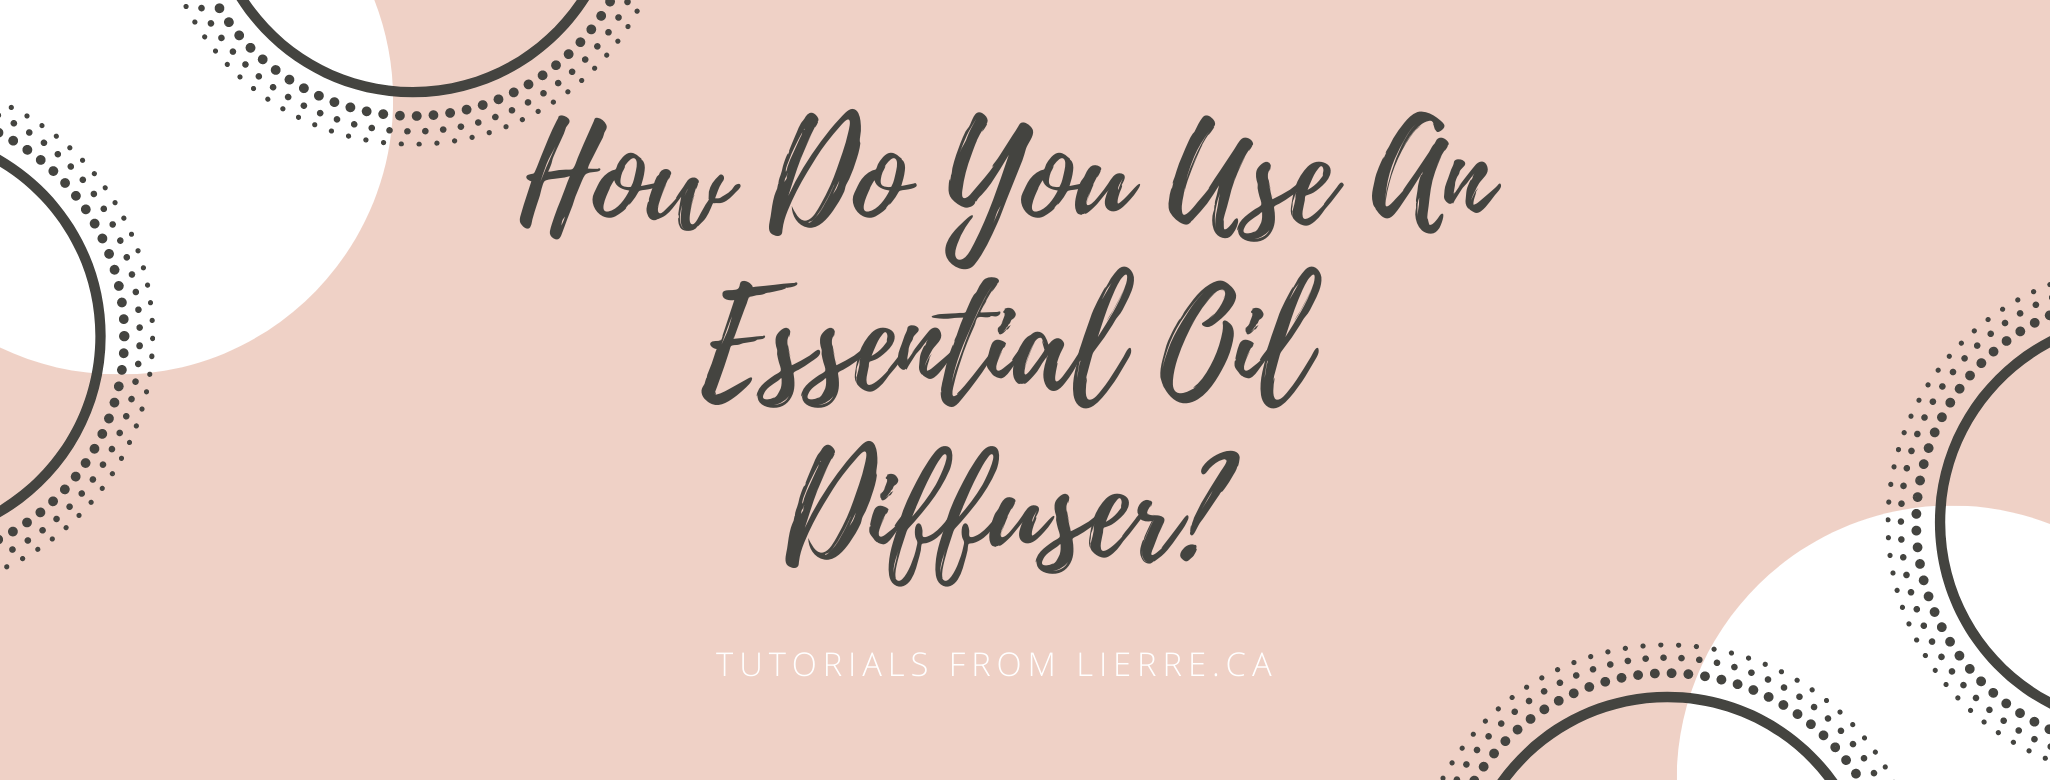 How Do You Use An Essential Oil Diffuser?